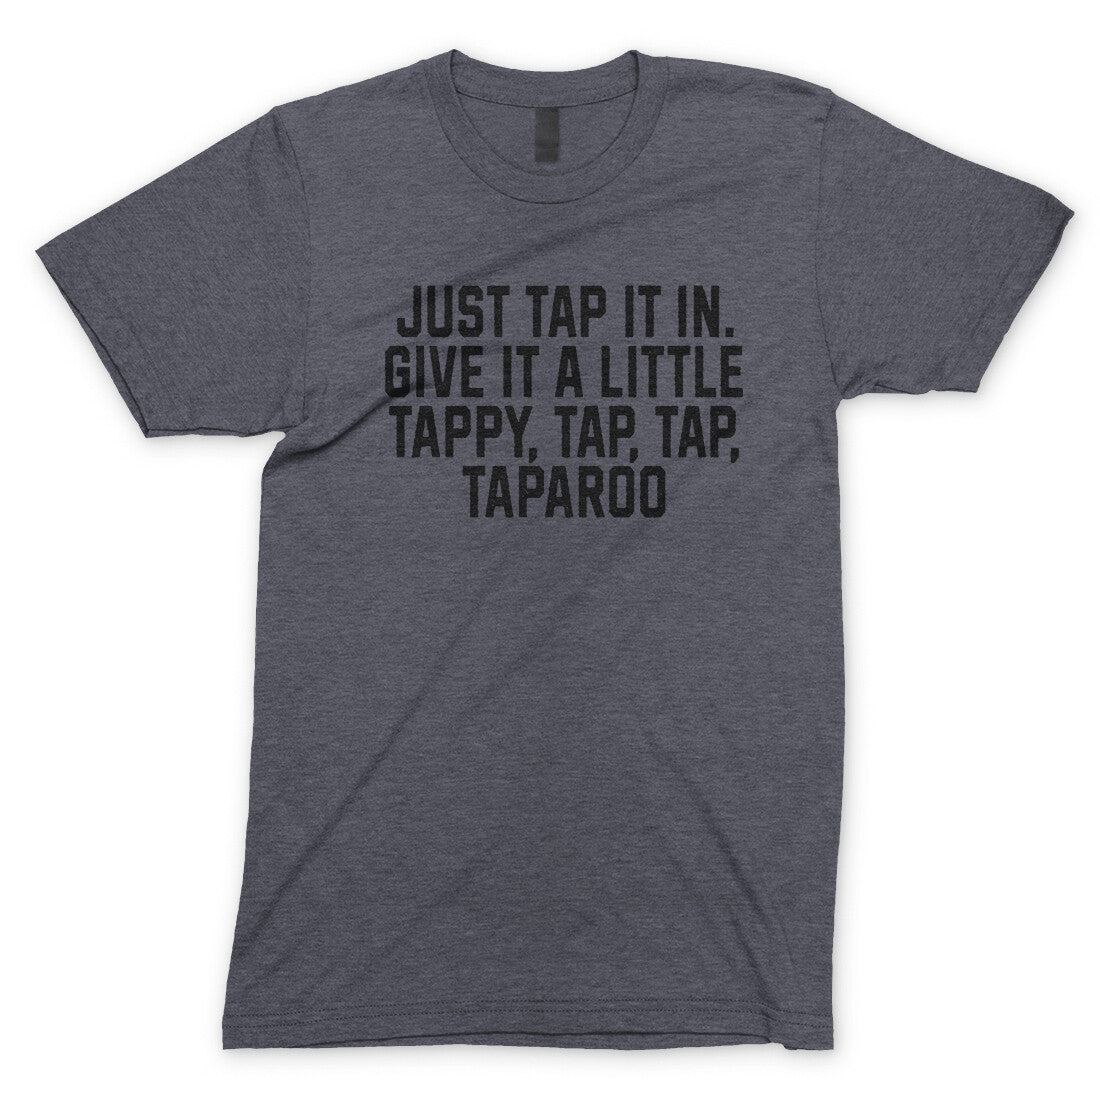 Just Tap it in Give it a Little Tappy Tap Tap Taparoo in Dark Heather Color